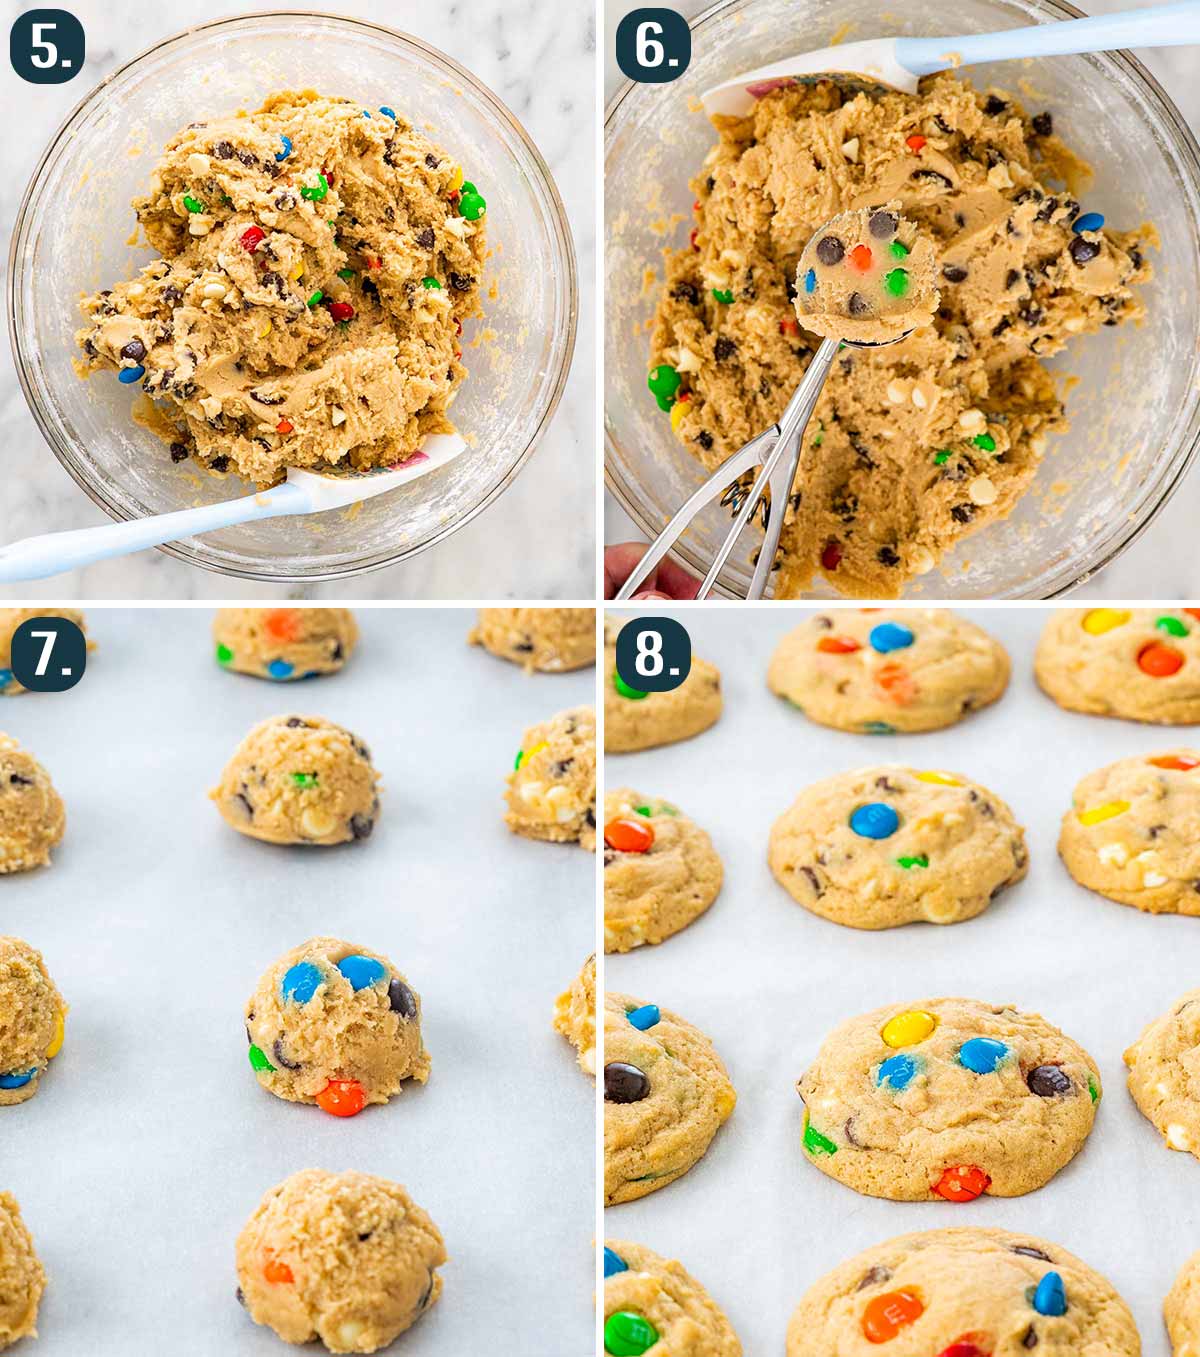 process shots showing how to form and bake m&m cookies.